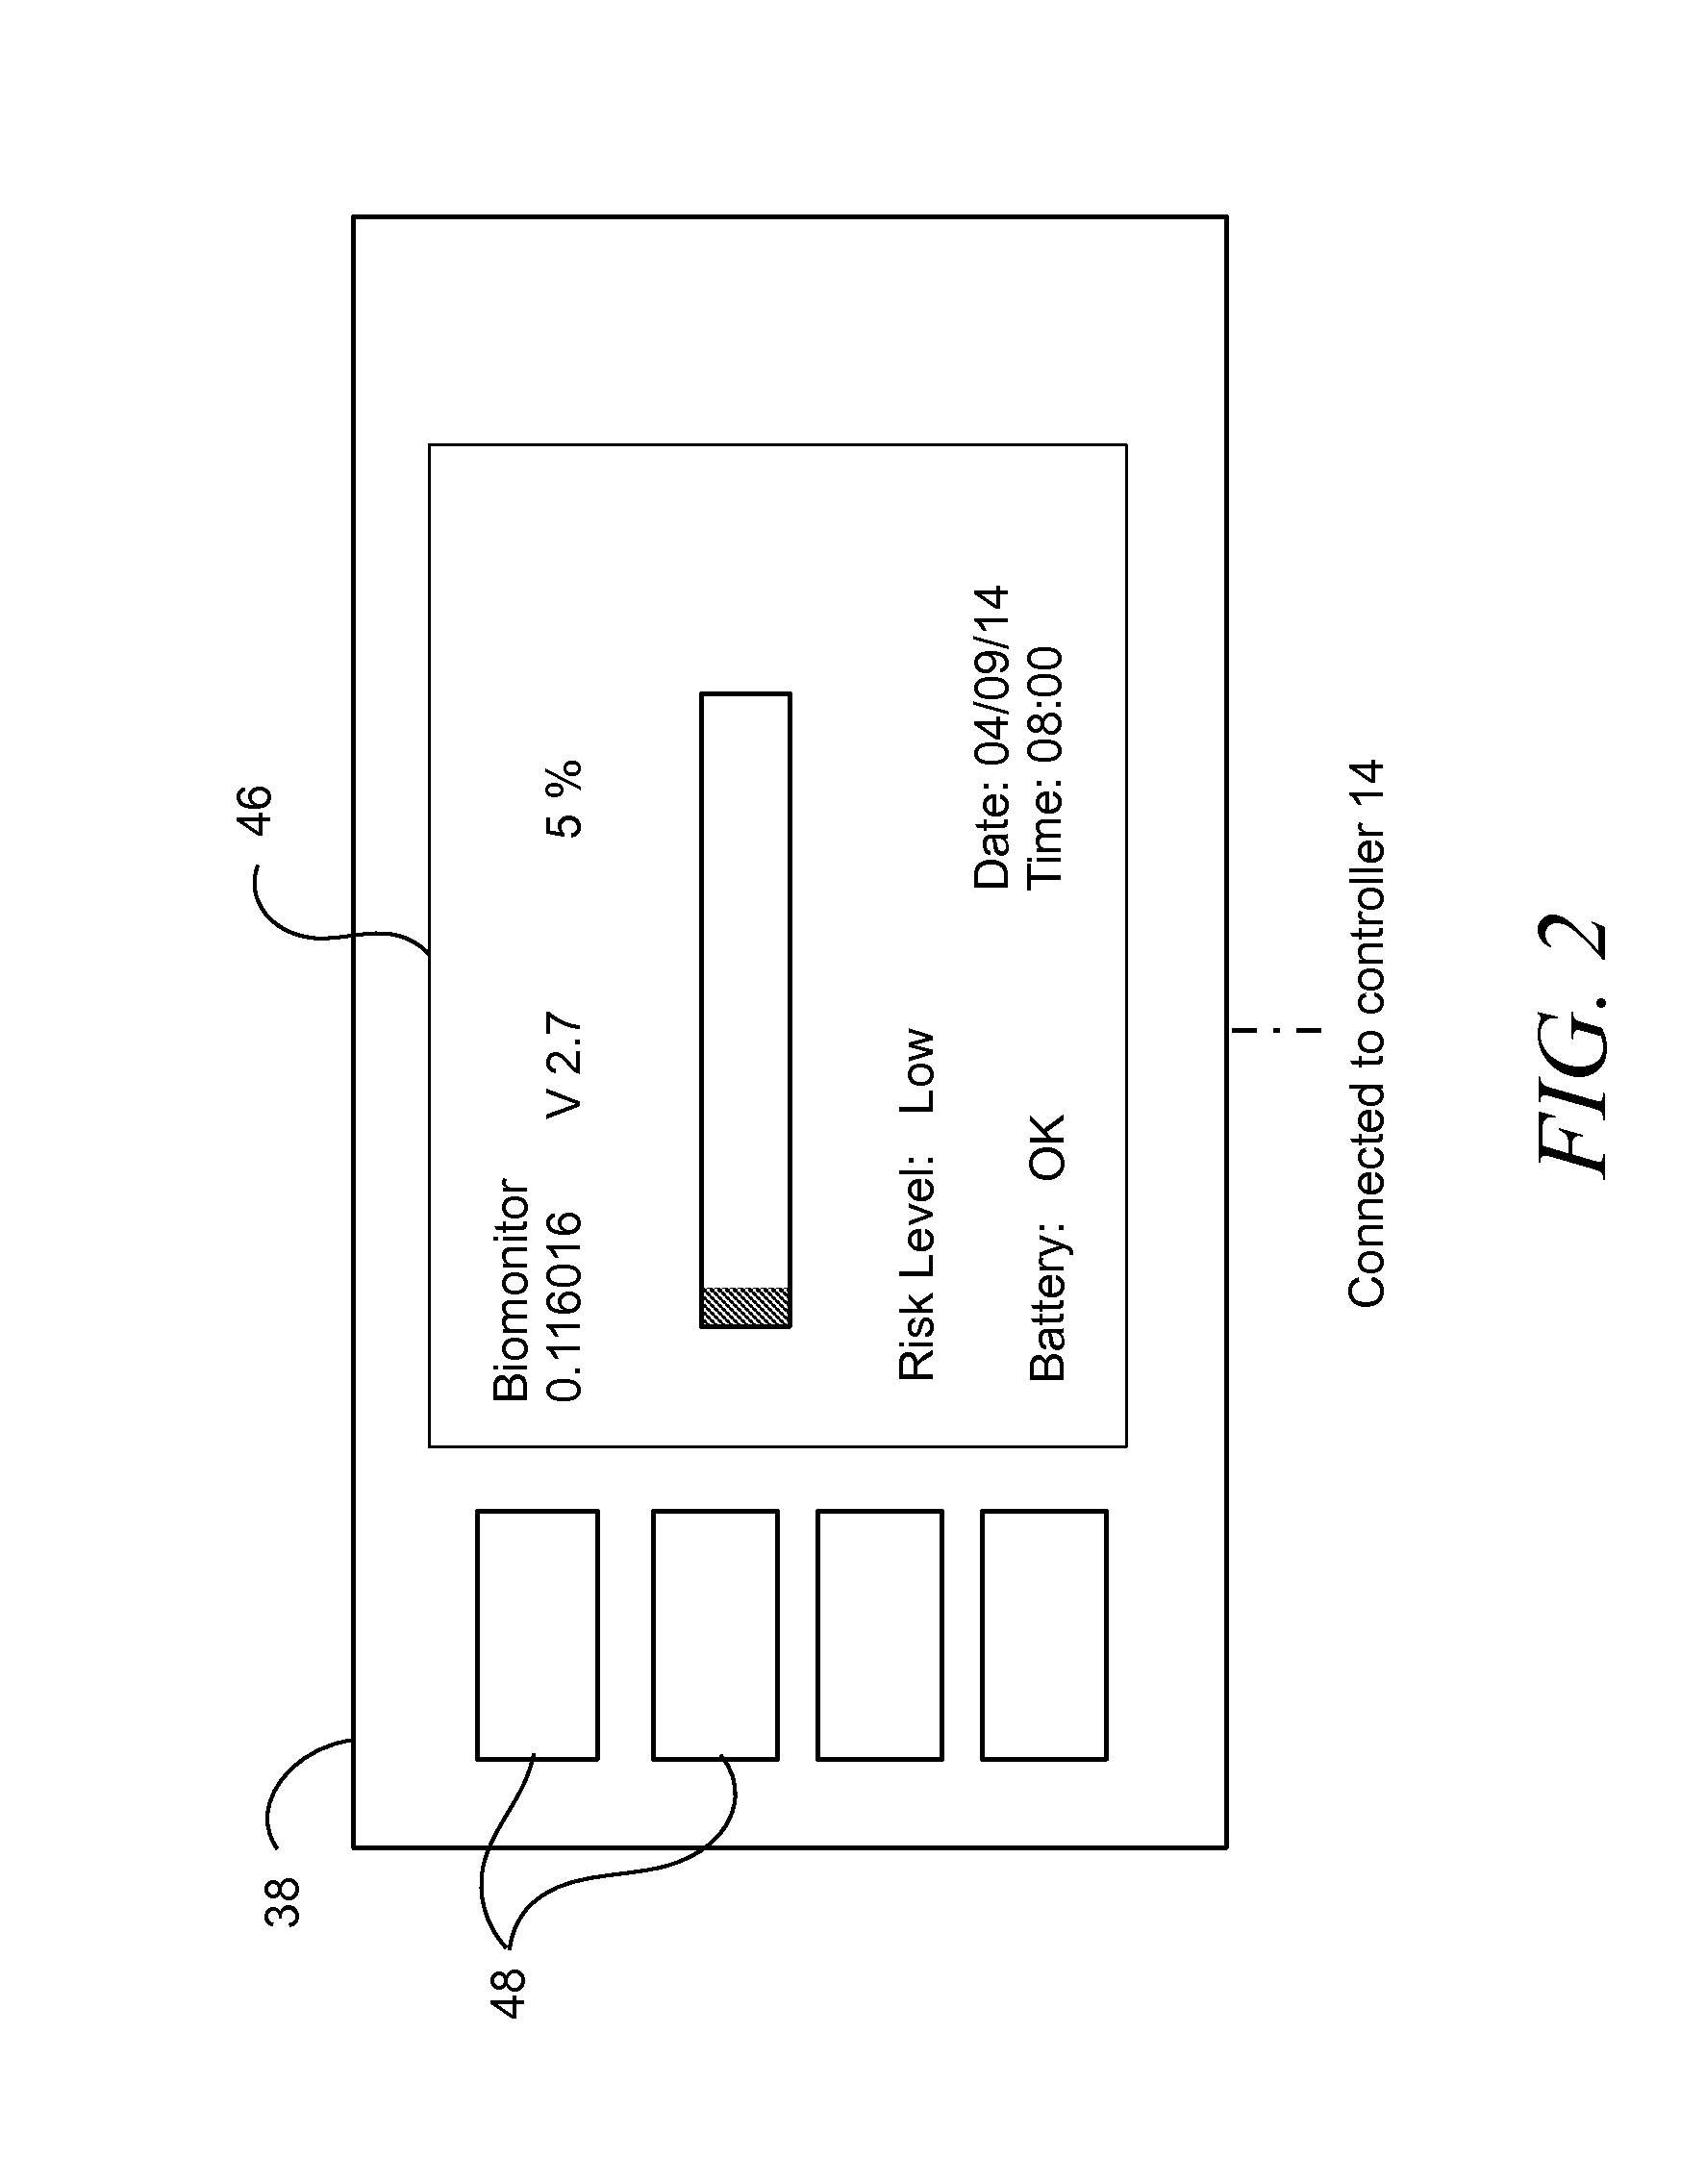 System and Method for Detecting Biofilm Growth in Water Systems